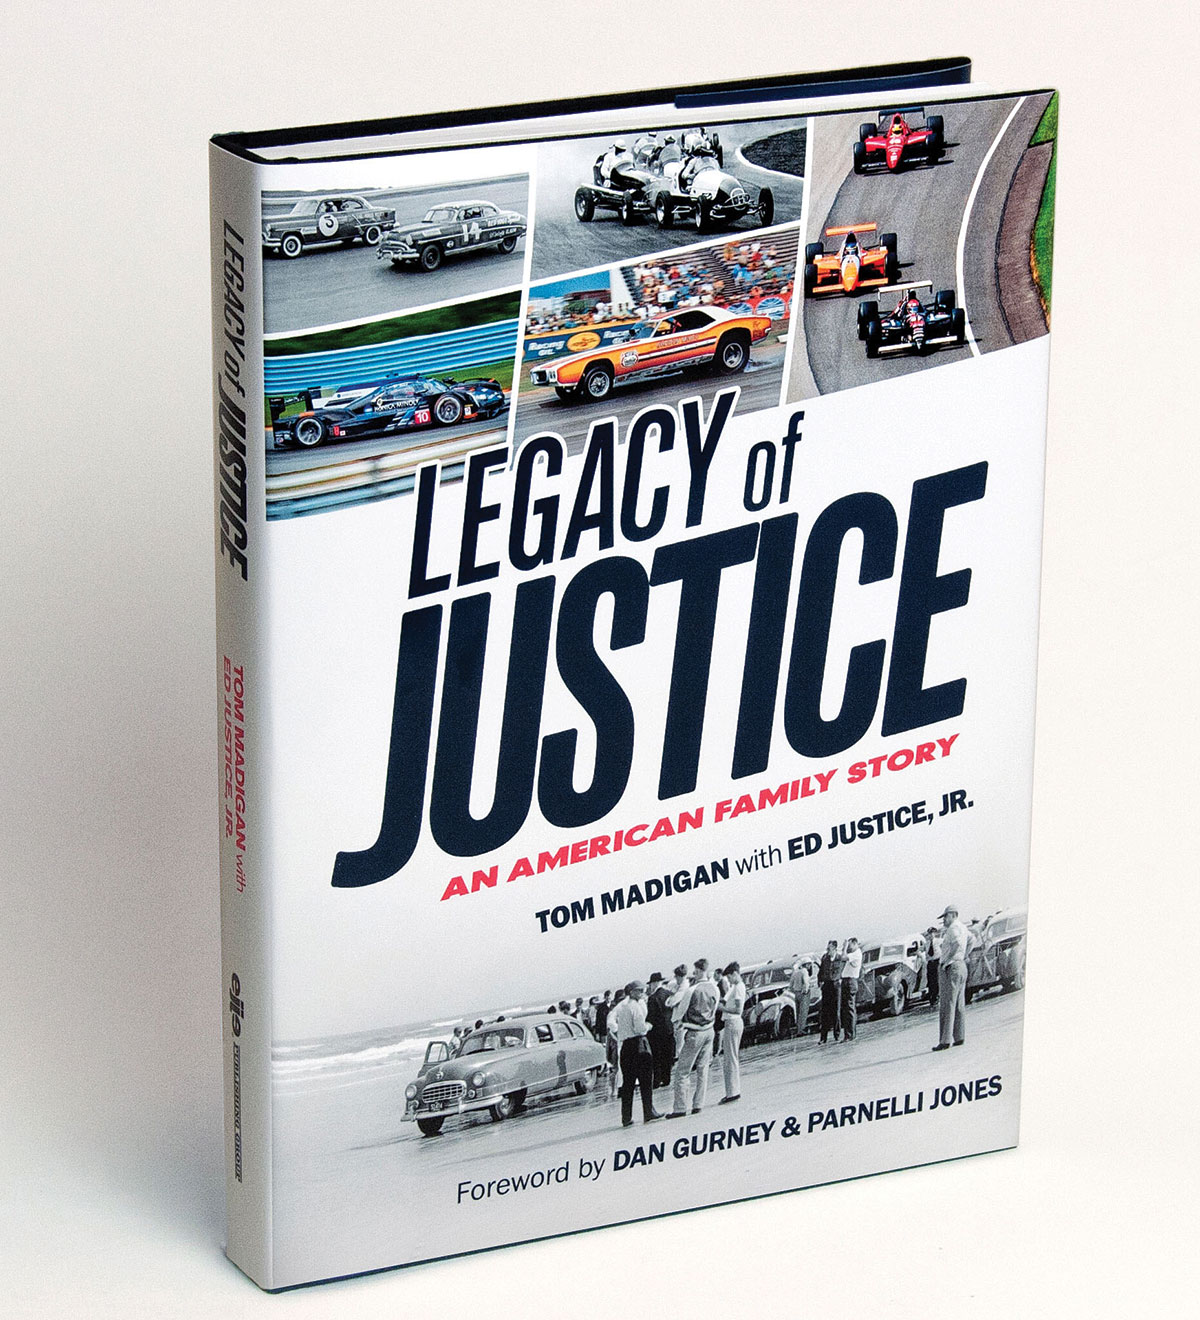 A book cover photograph of the Legacy of Justice: An American Family Story by Tom Madigan with Ed Justice Jr.